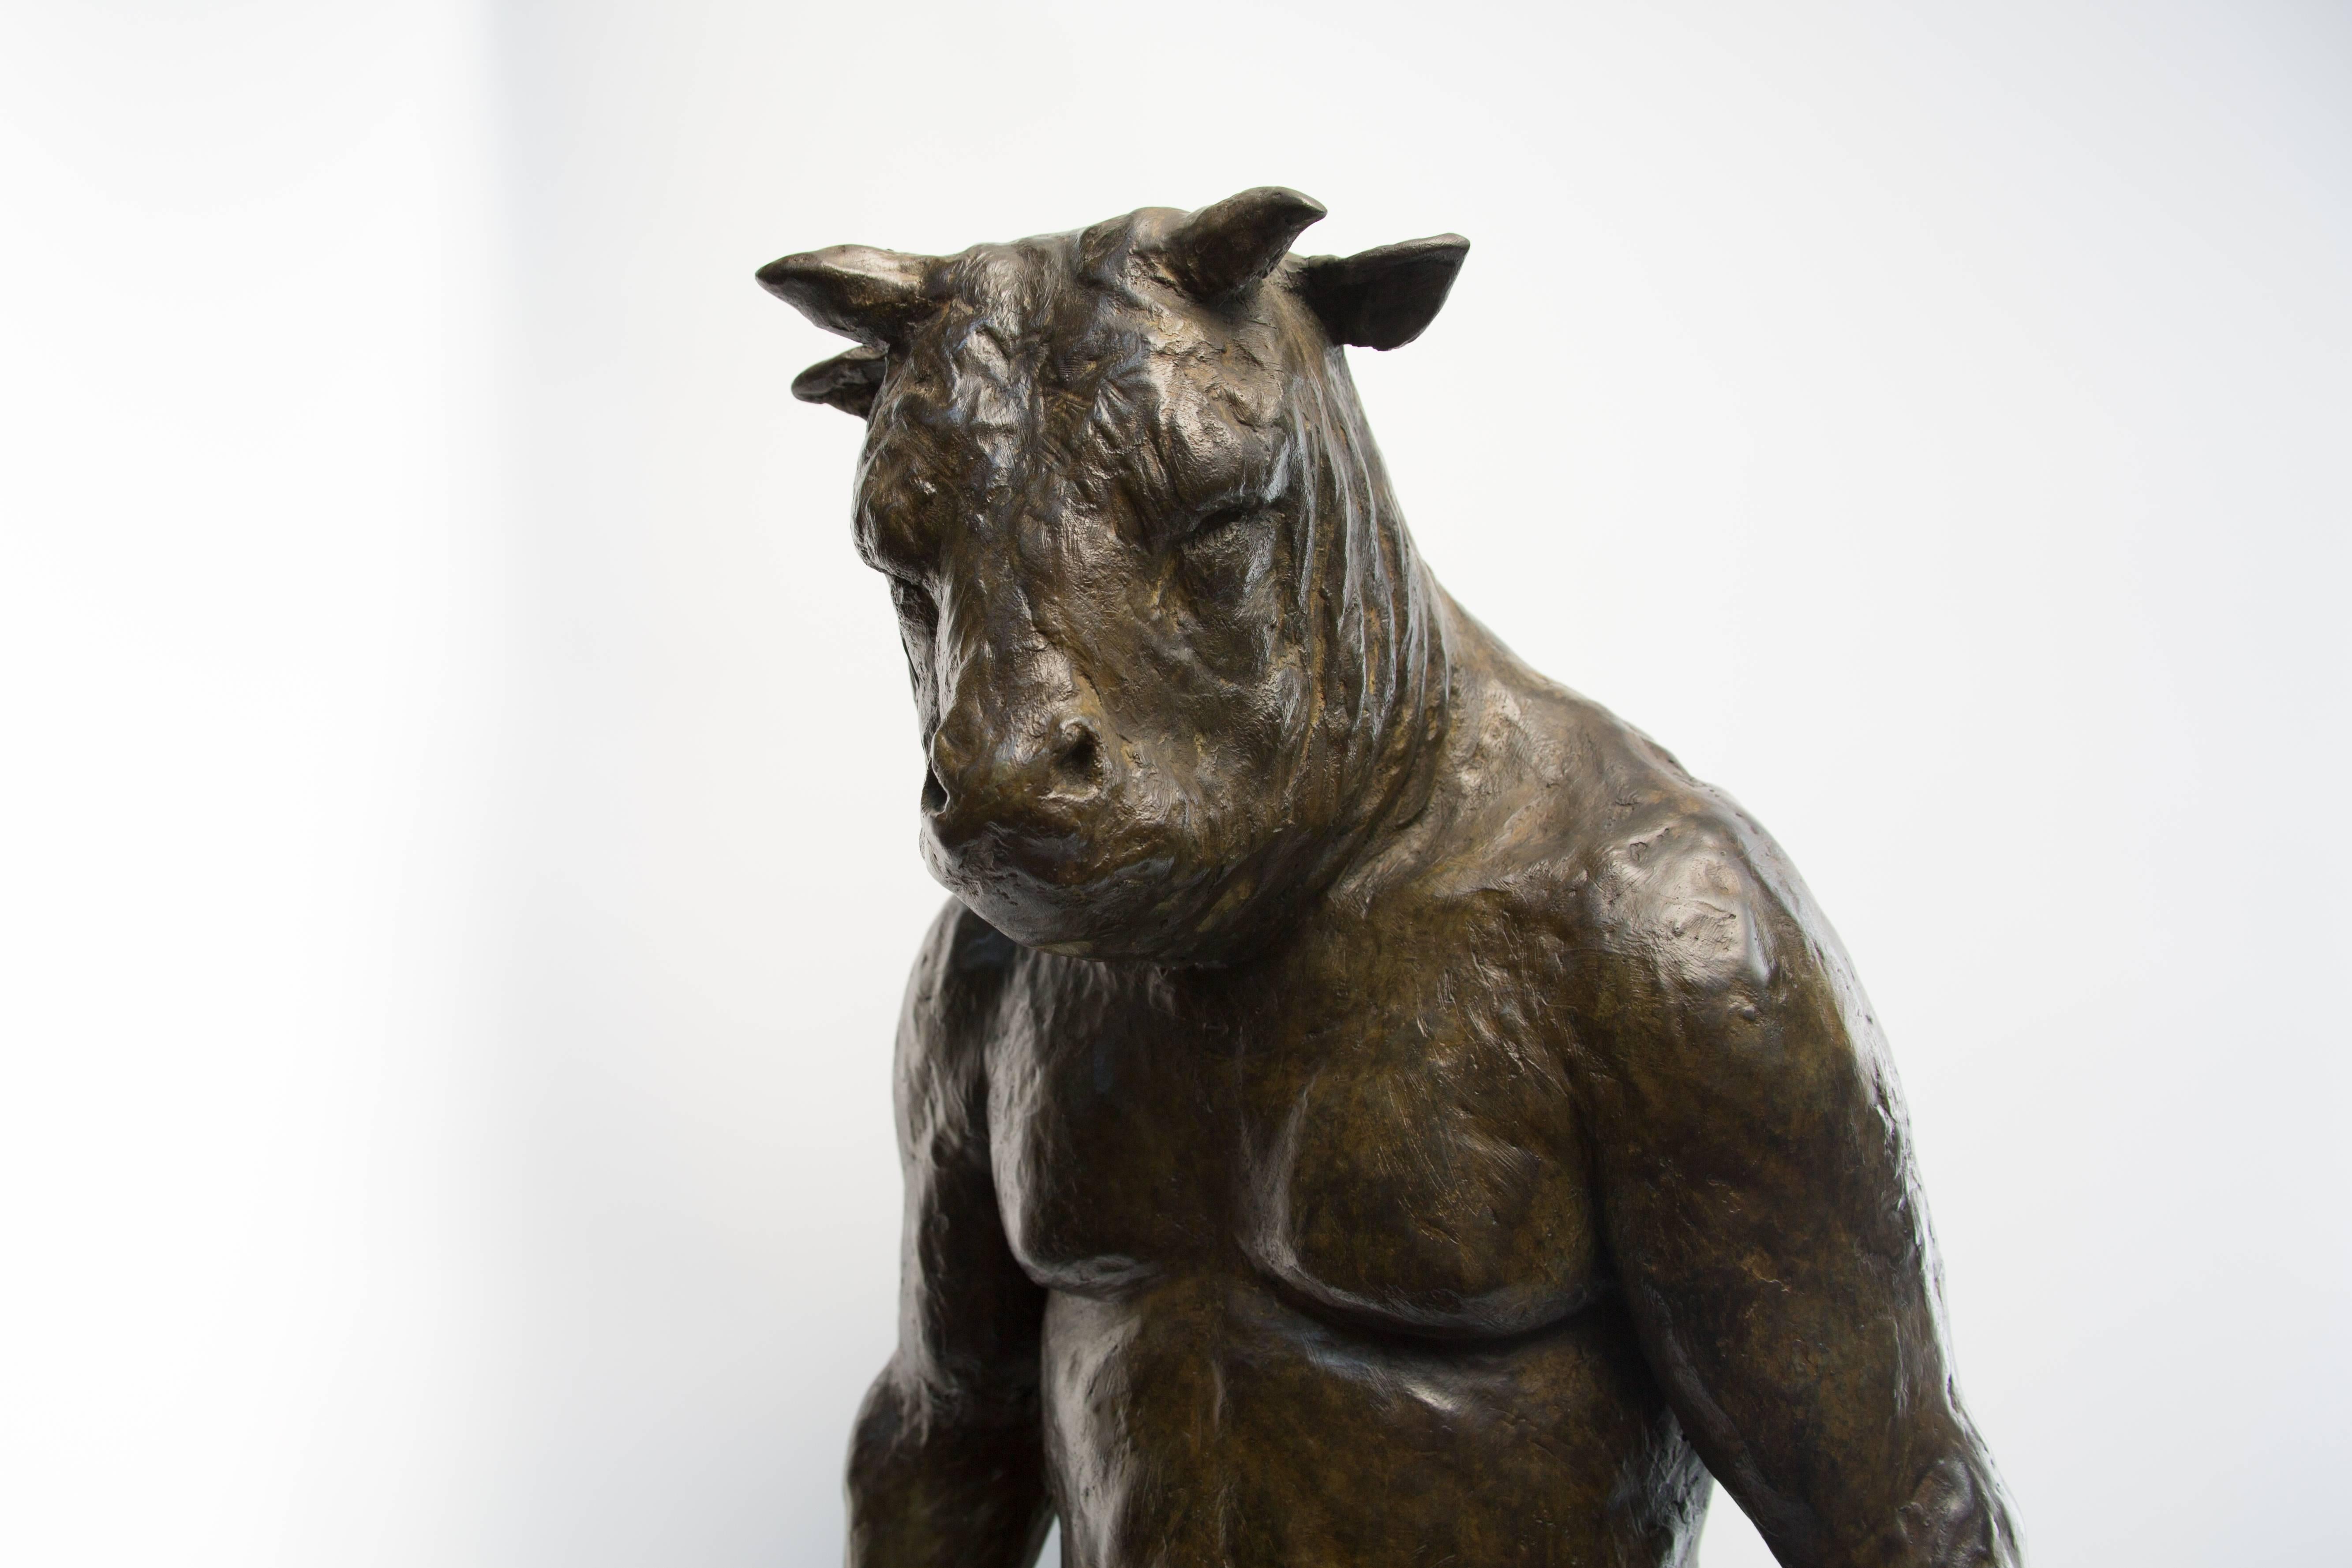 This bronze sculpture depicts an animal and human figure, inspired by mythology and imaginative realism, and is a bronze casting of animal head on human body.

Anyone who shares Beth Carter’s fascination with the human condition must surely embrace